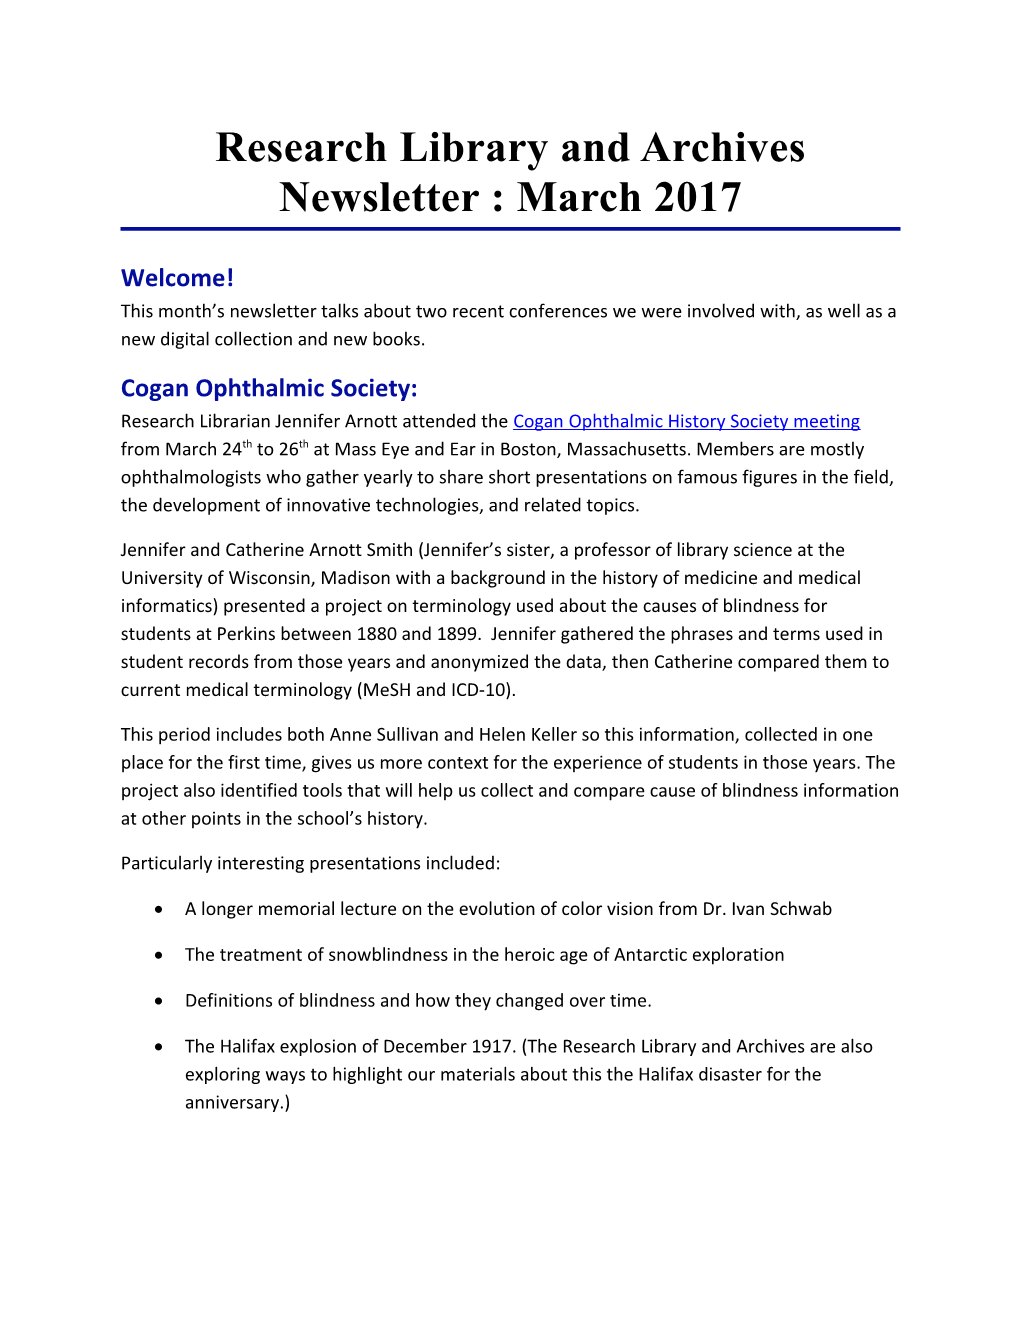 Research Libraryand Archives Newsletter :March 2017